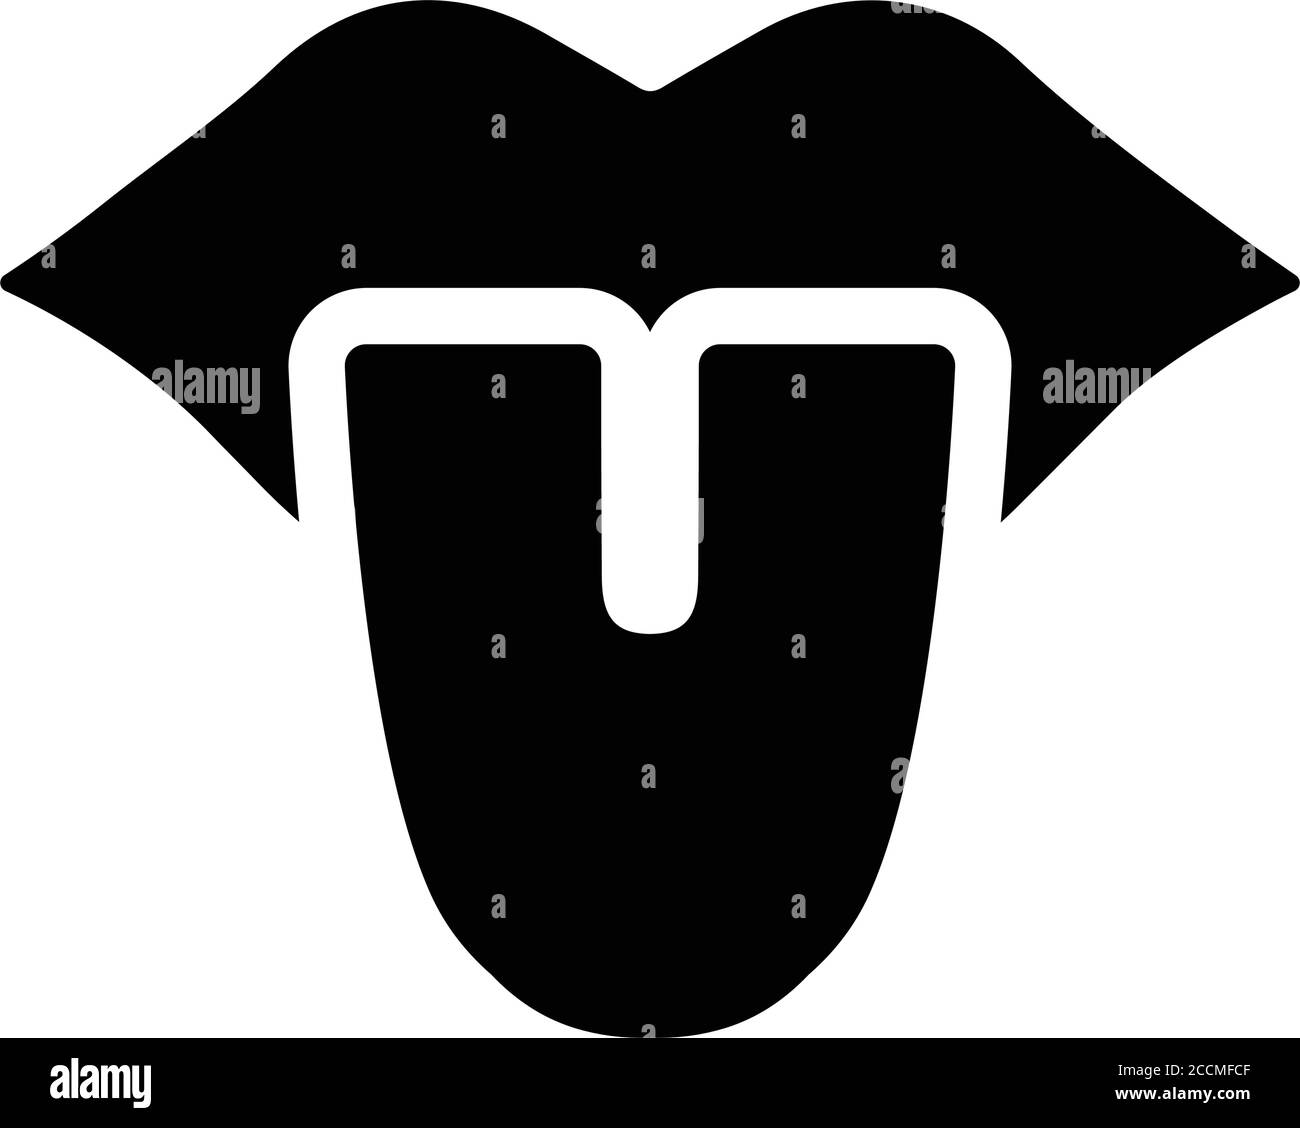 Oral, Tongue Icon is use in designing and developing websites, commercial, print media, web or any type of design projects. Stock Vector